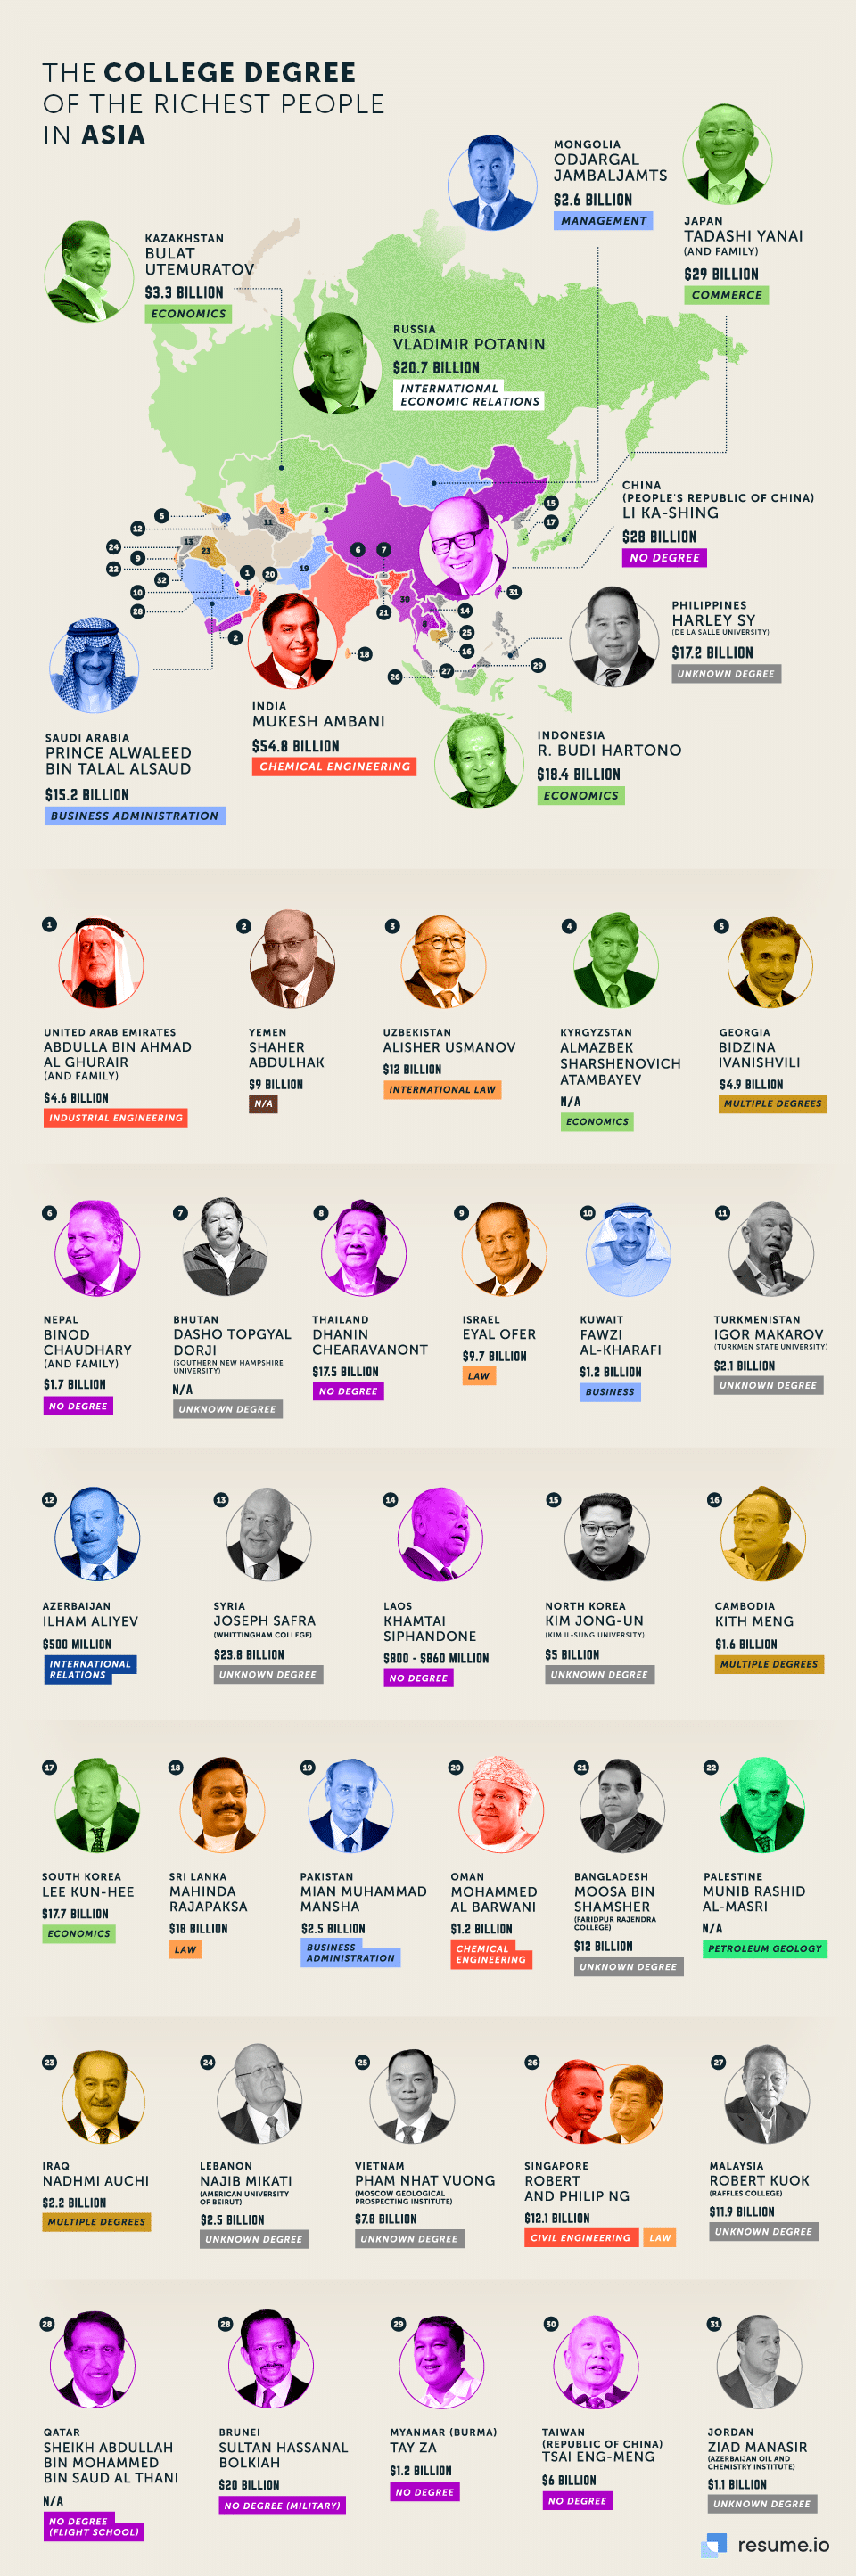 Degrees of Each Country's Richest Person